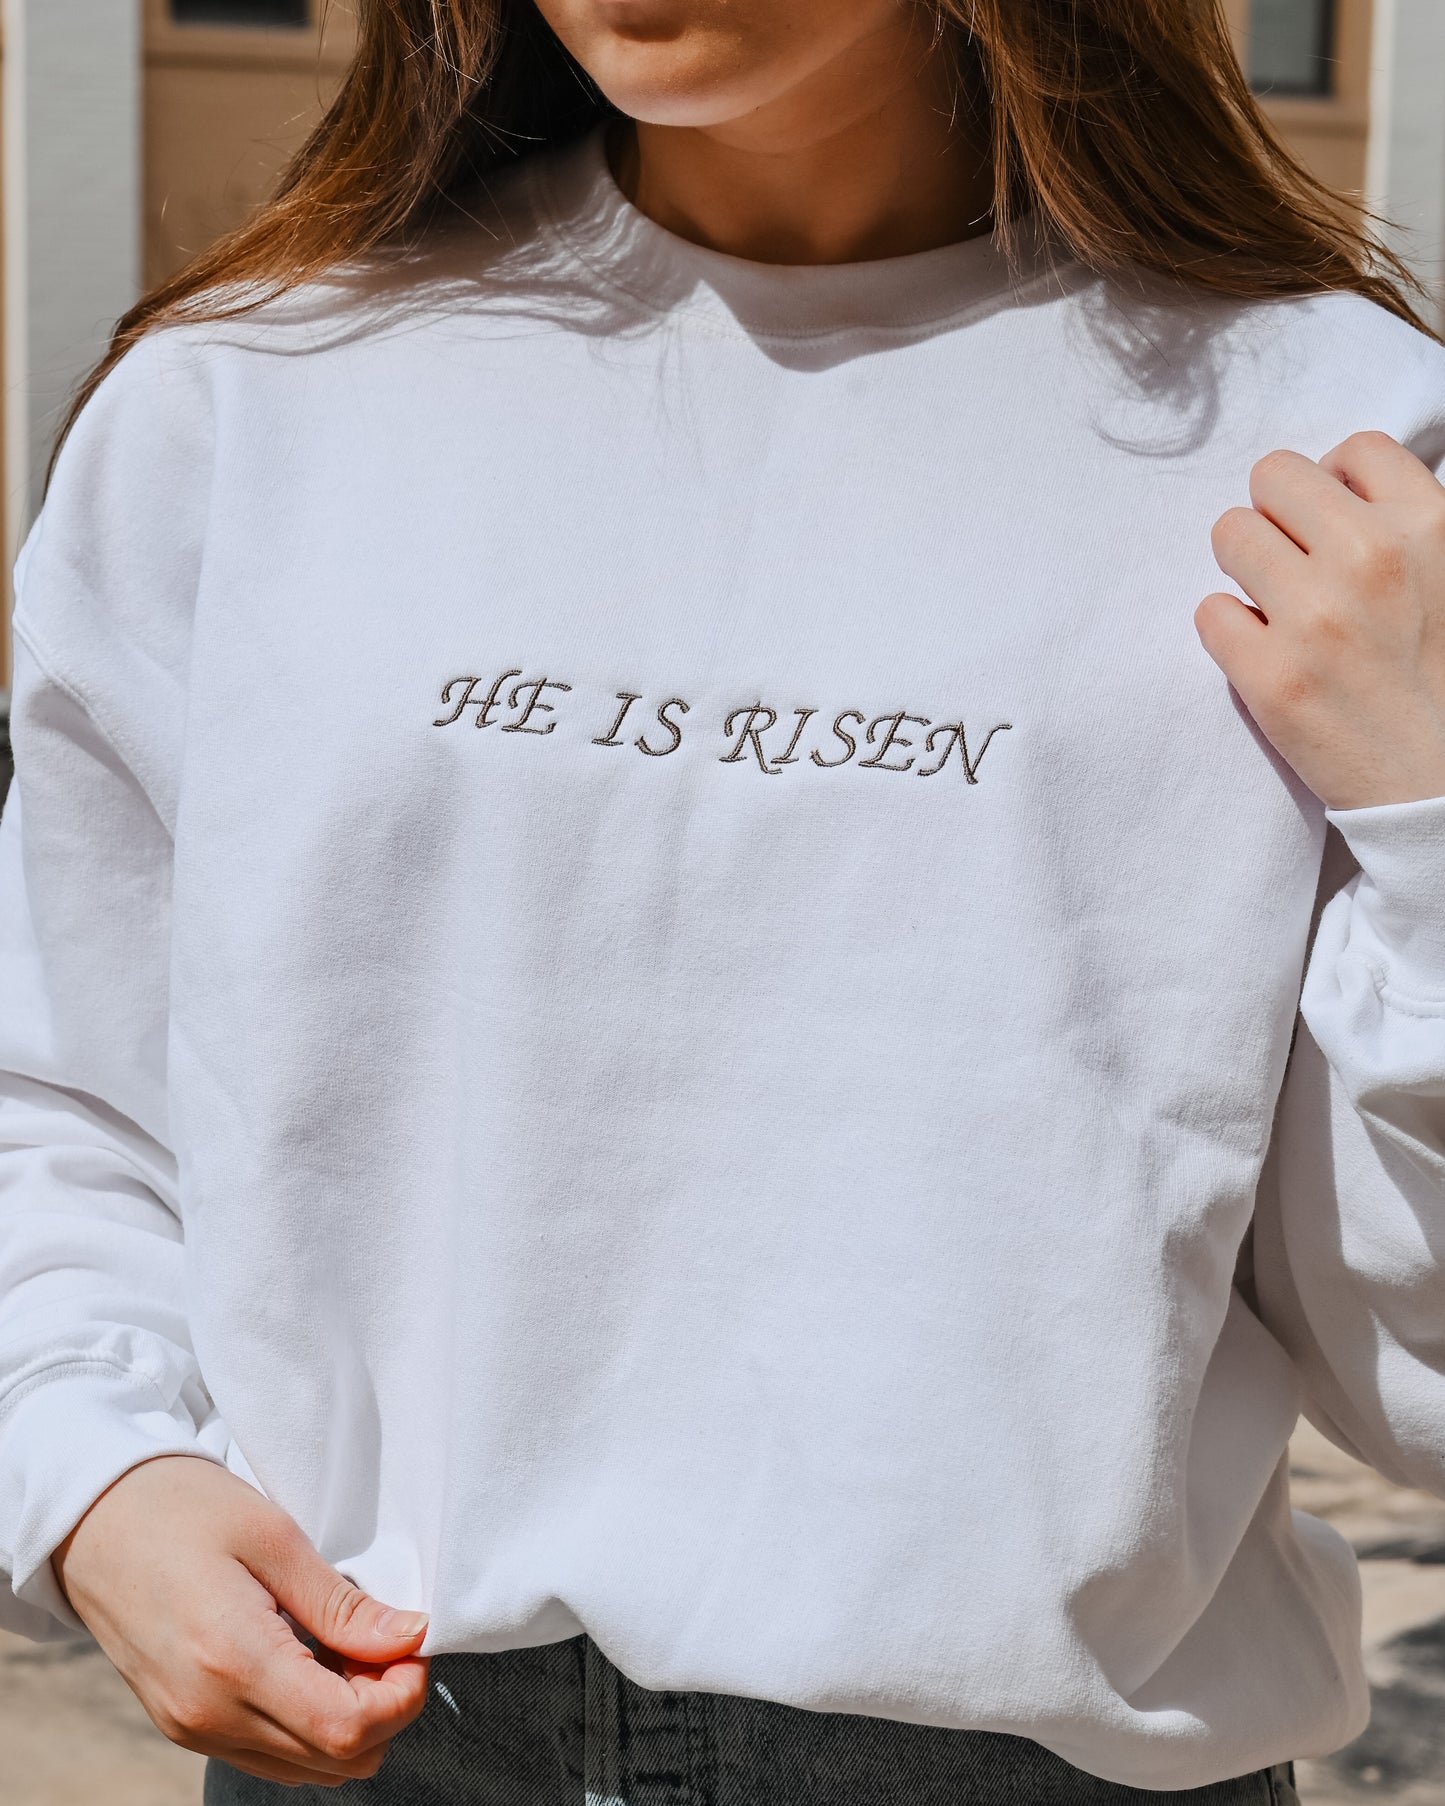 White embroidered “HE IS RISEN” crewneck